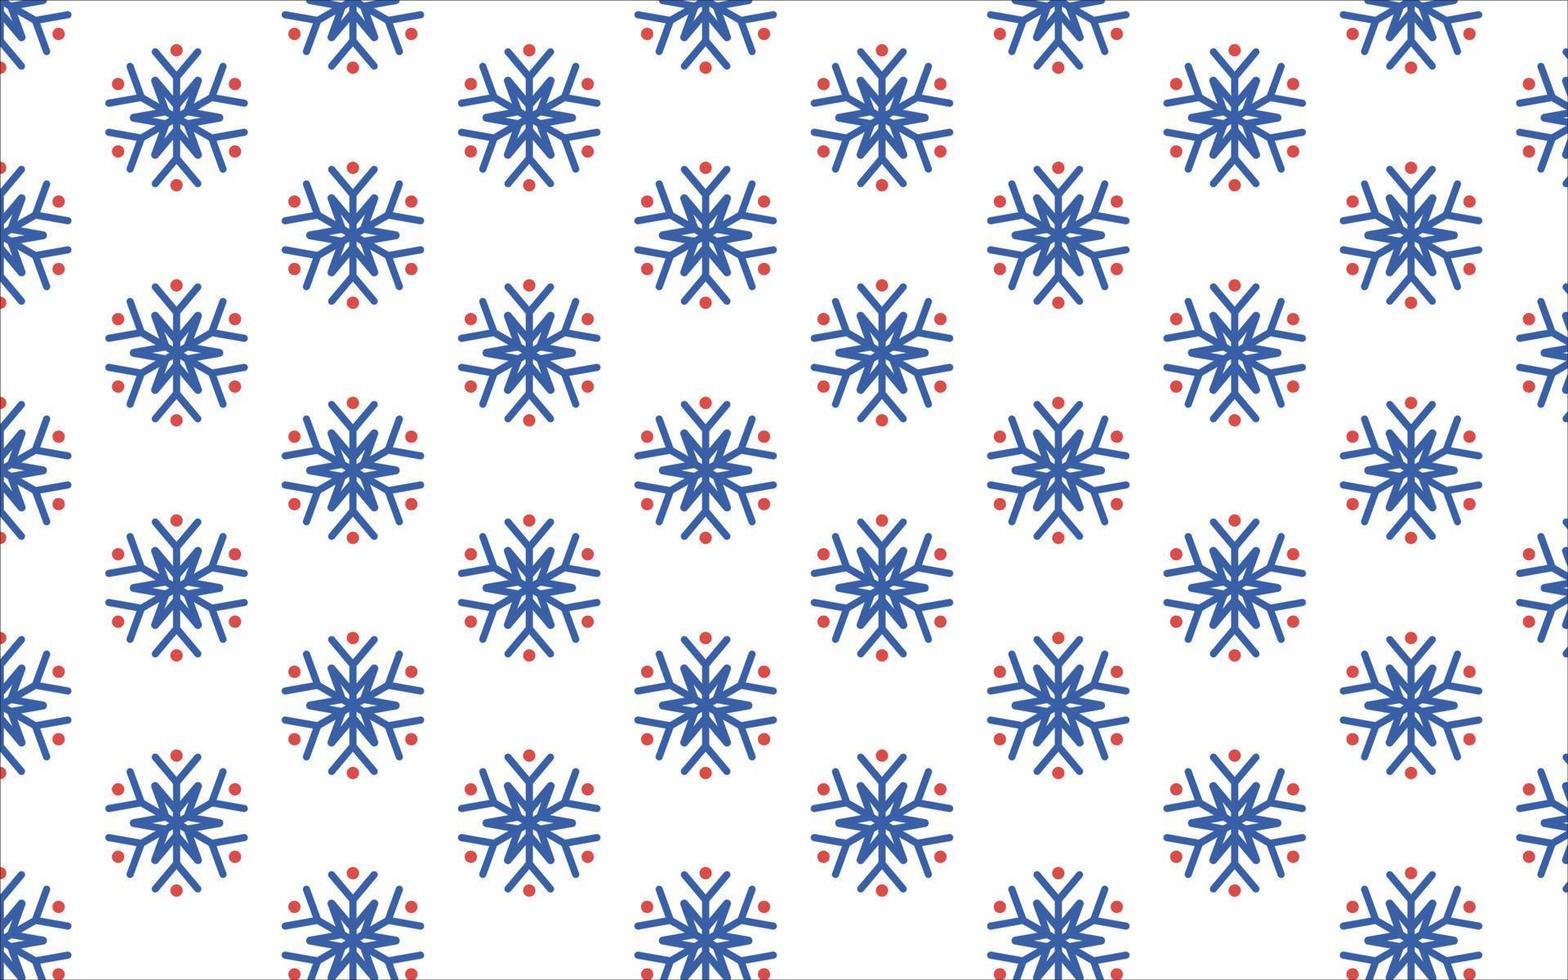 PATTERN BACKGROUND WALLPAPER SIMPLE vector